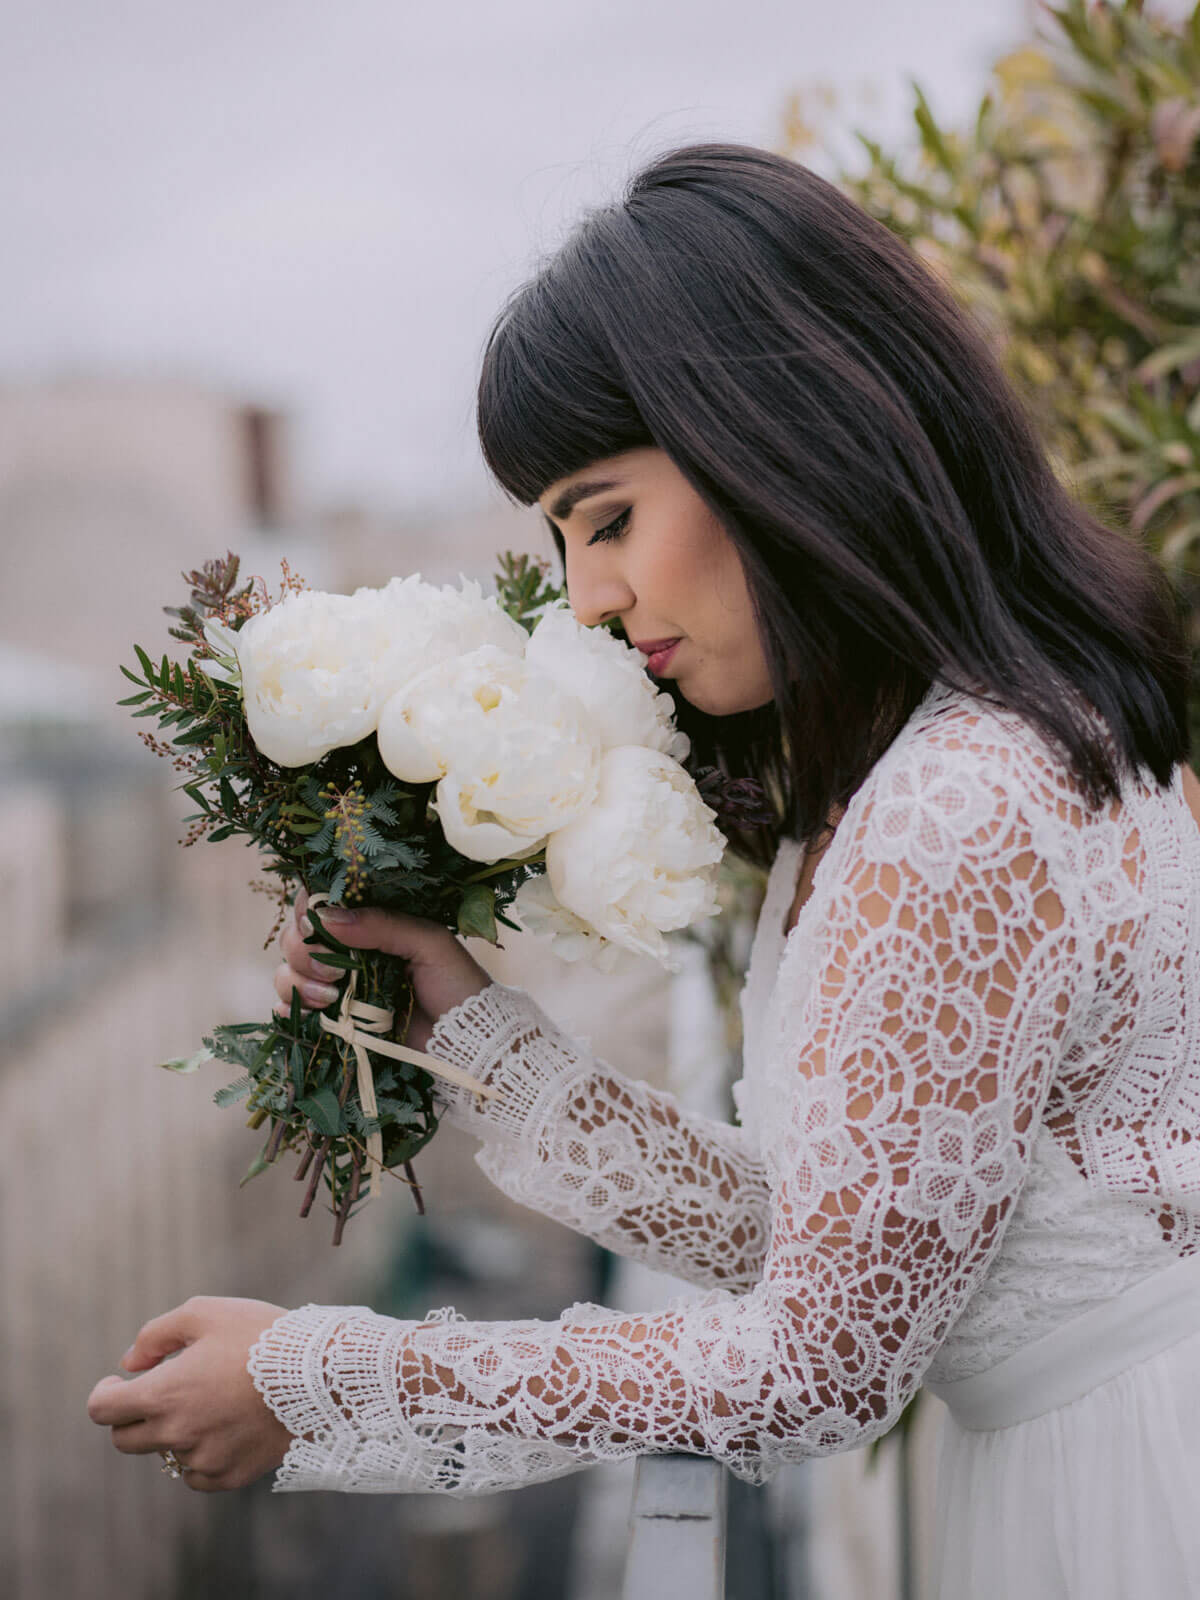 The bride is smelling her flower bouquet in Paris, France. New Year's Destination wedding image by Jenny Fu Studio